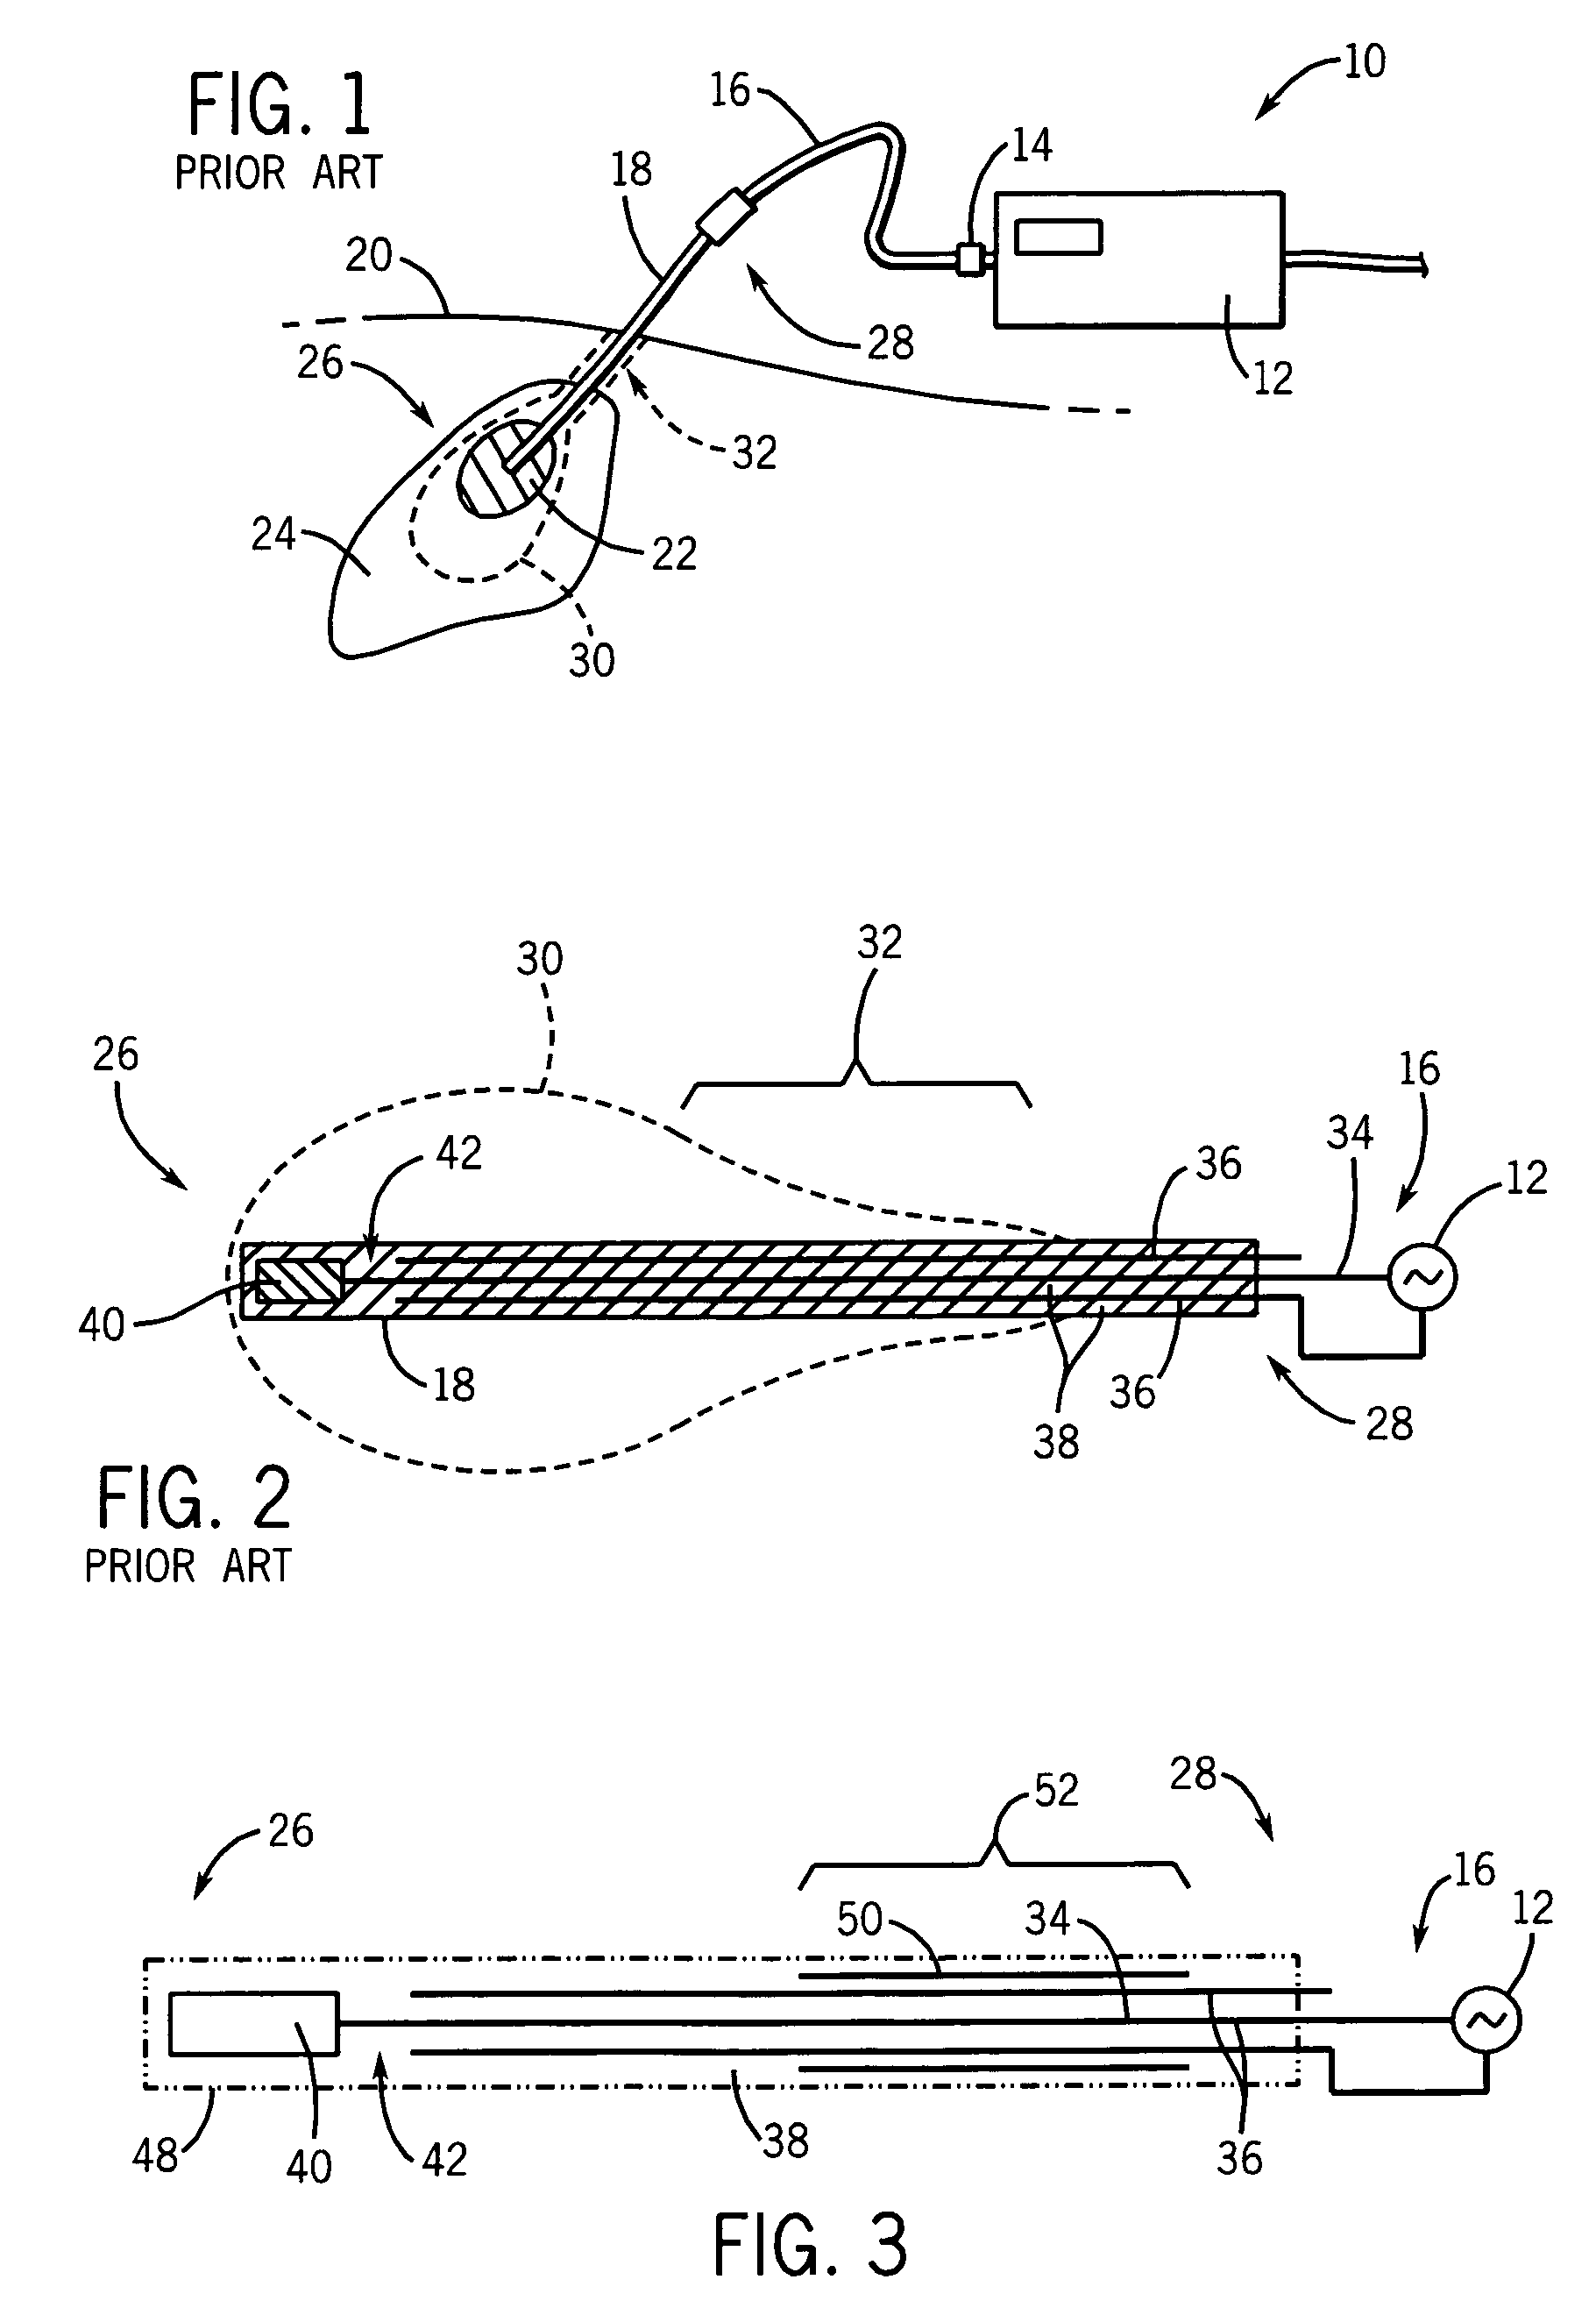 Floating sleeve microwave antenna for tumor ablation